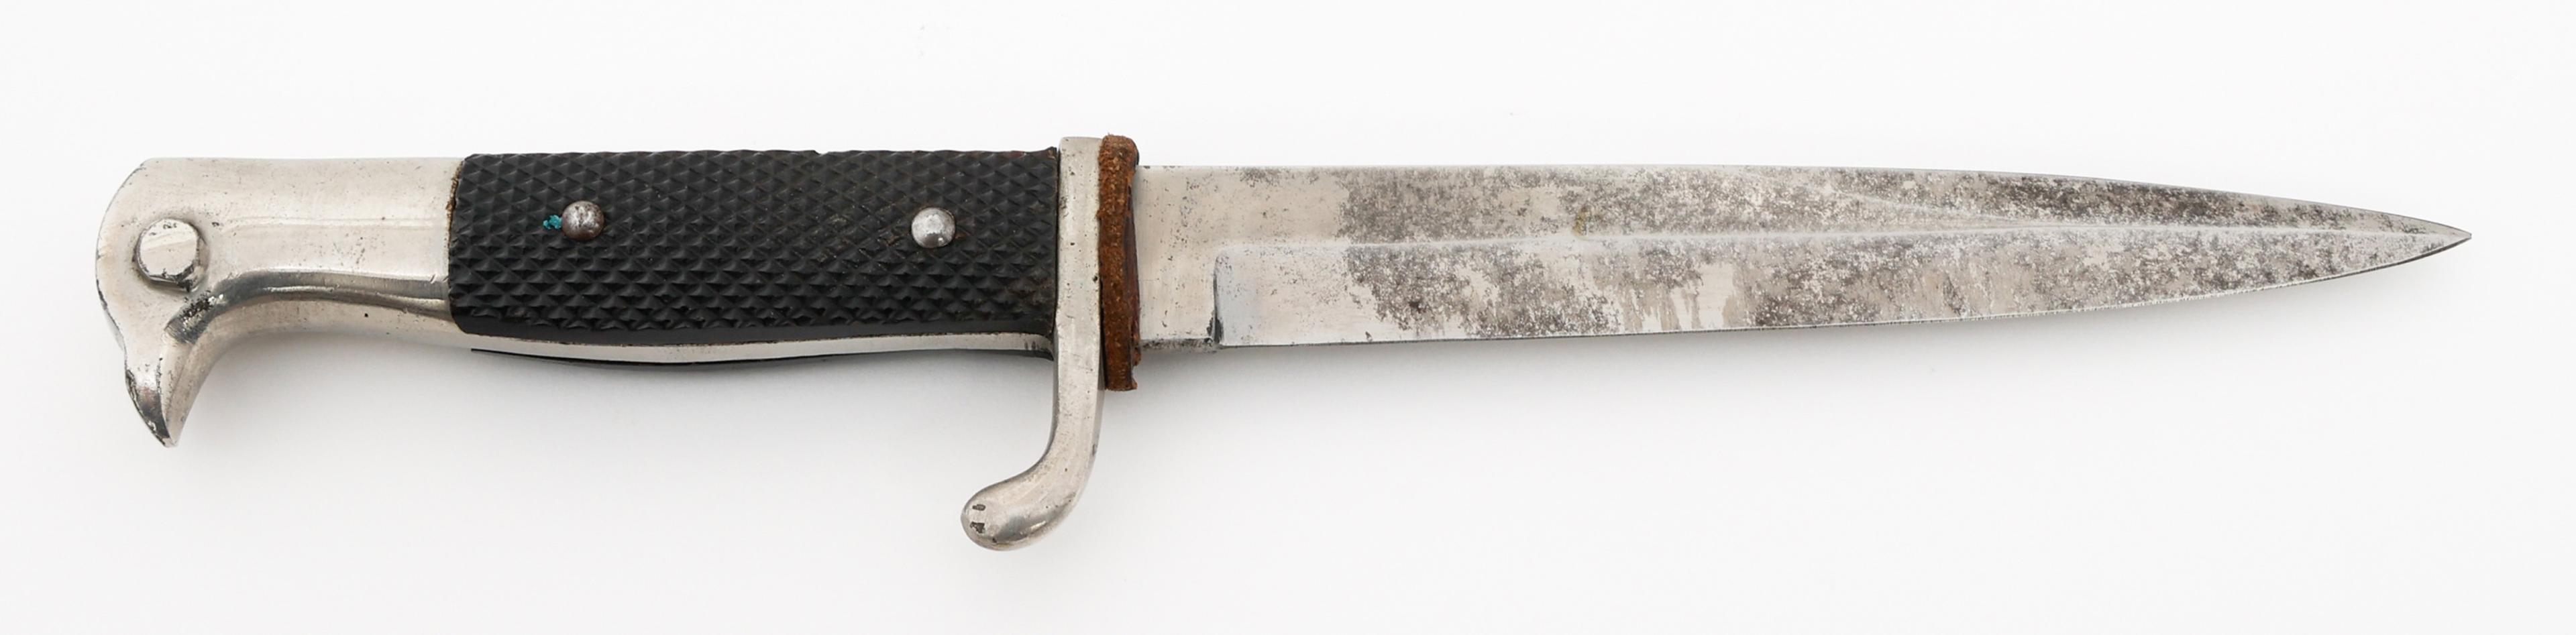 WWII GERMAN BOOT KNIFE WITH SCABBARD